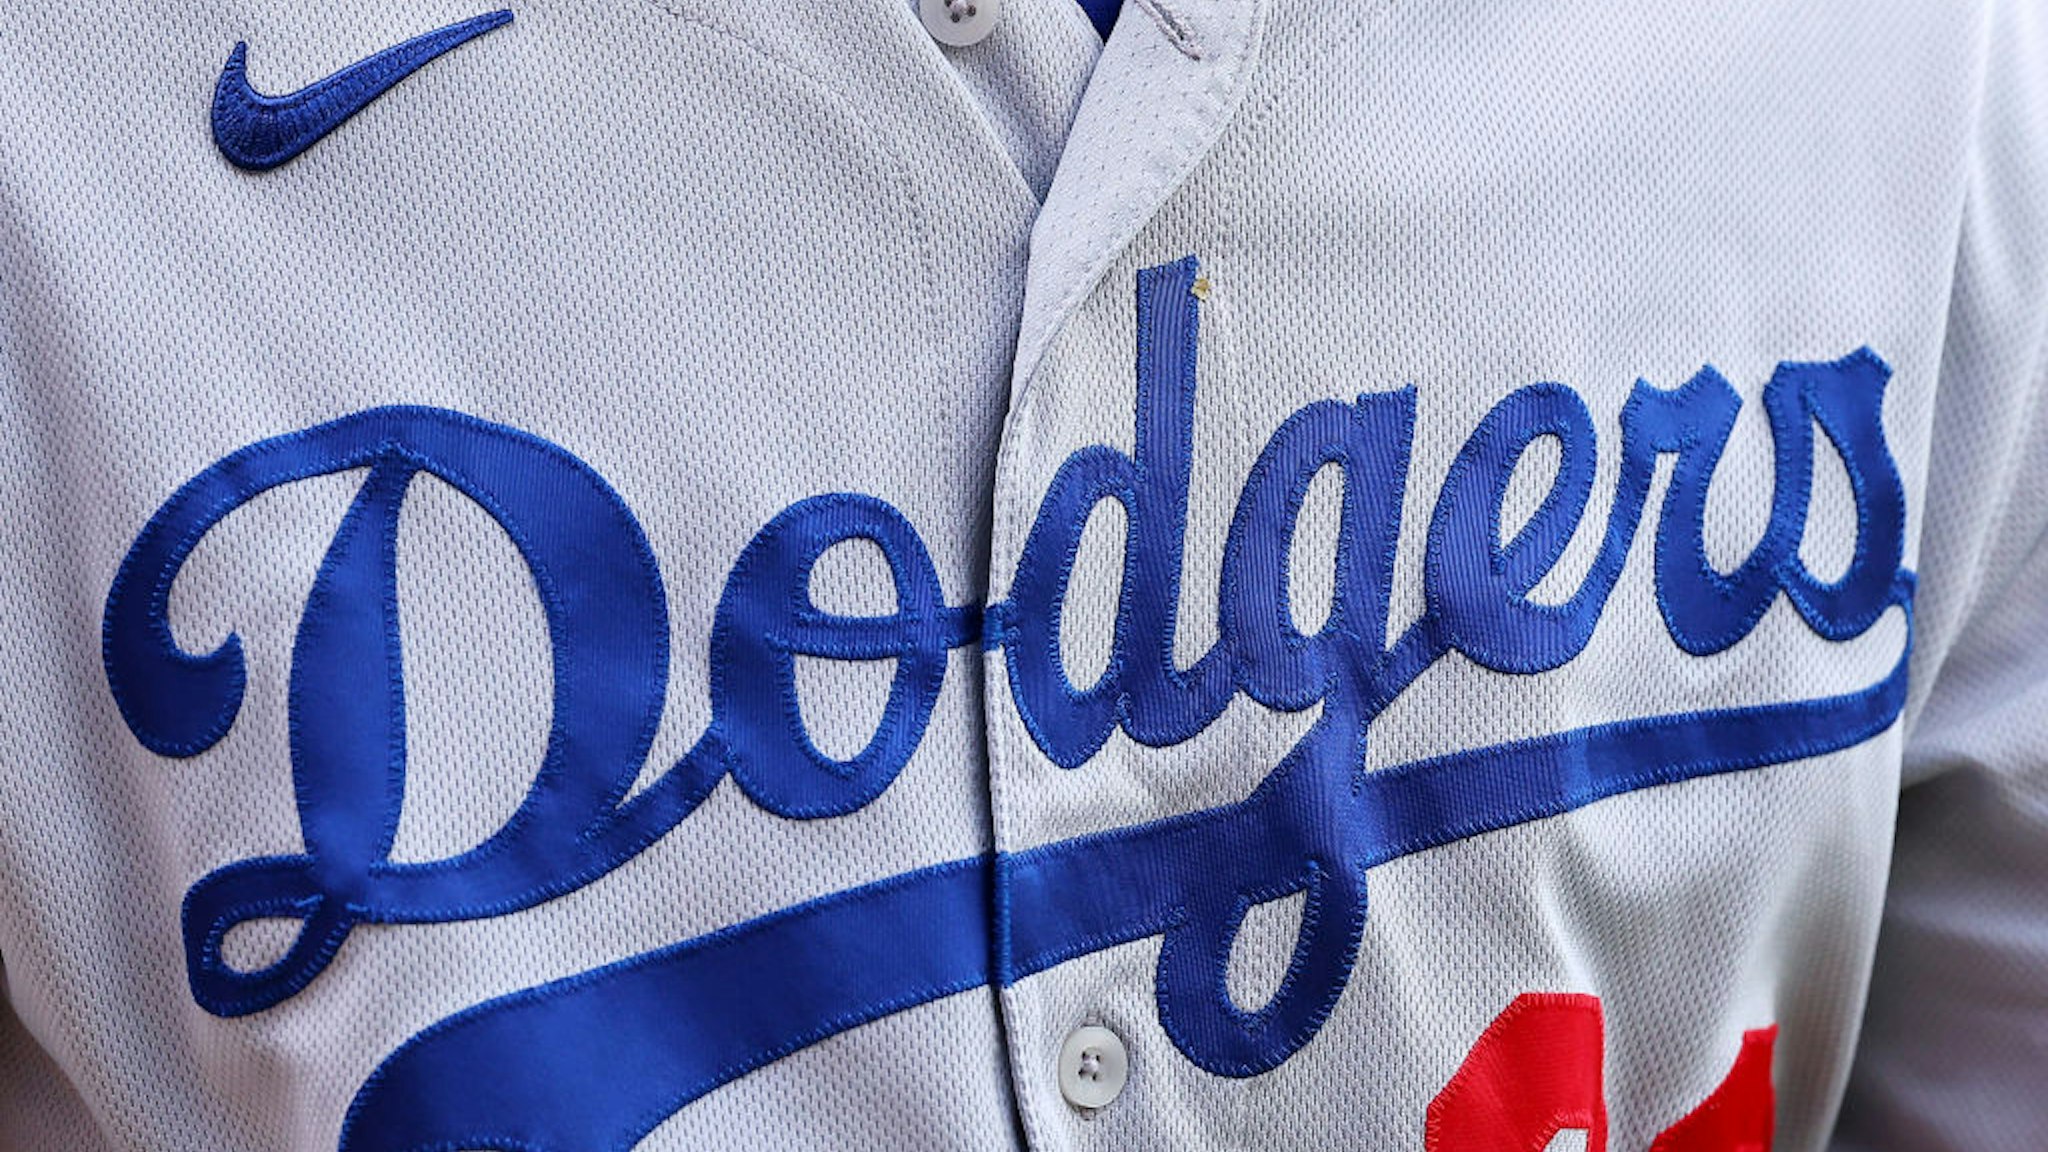 CHICAGO, ILLINOIS - APRIL 21: A detail of a Los Angeles Dodgers logo against the Chicago Cubs at Wrigley Field on April 21, 2023 in Chicago, Illinois. (Photo by Michael Reaves/Getty Images)